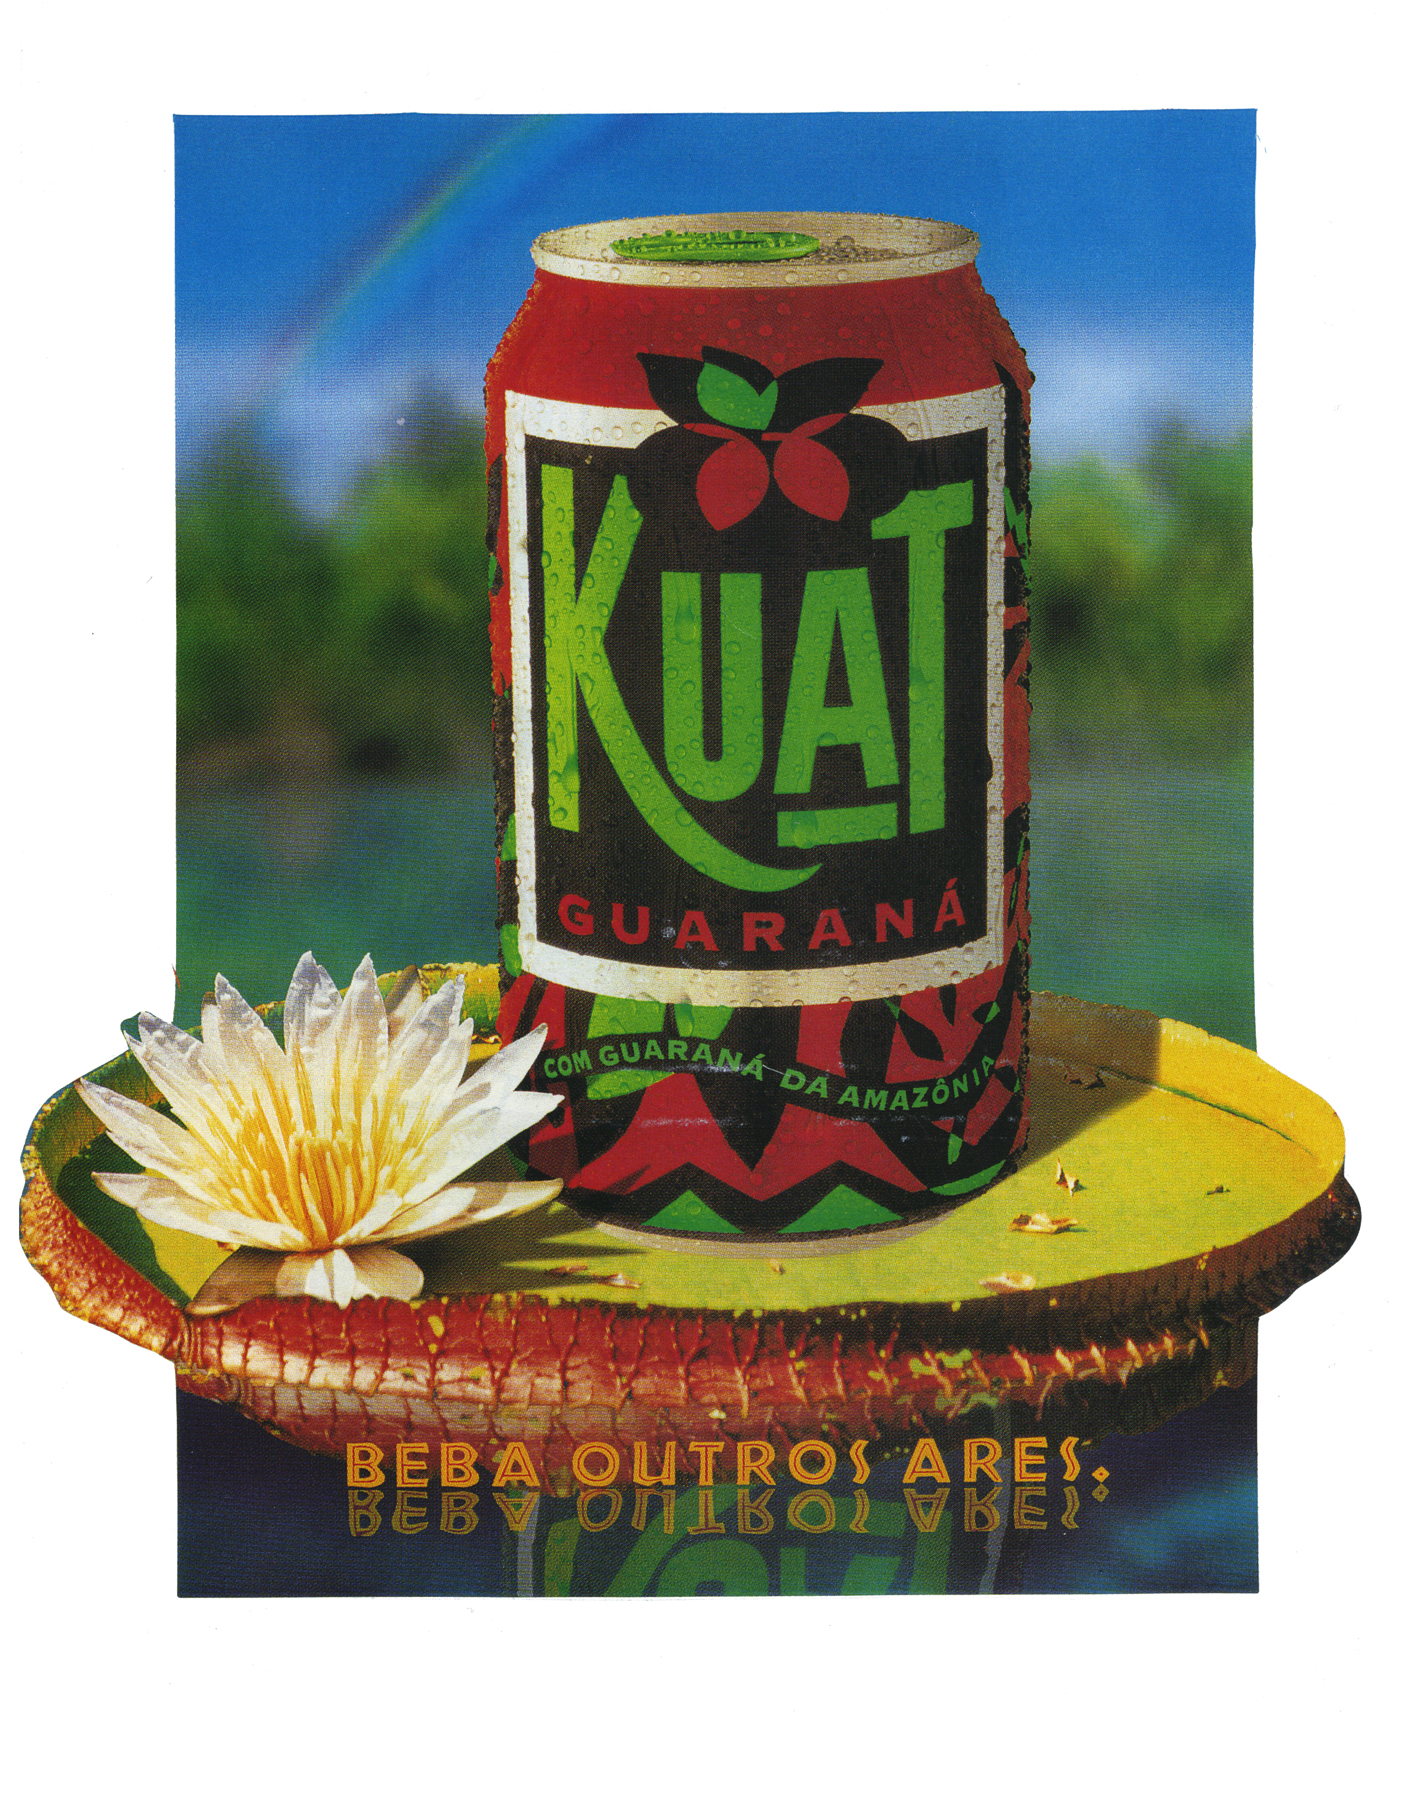 Kuat Advertising & Save the Rainforest Promotion